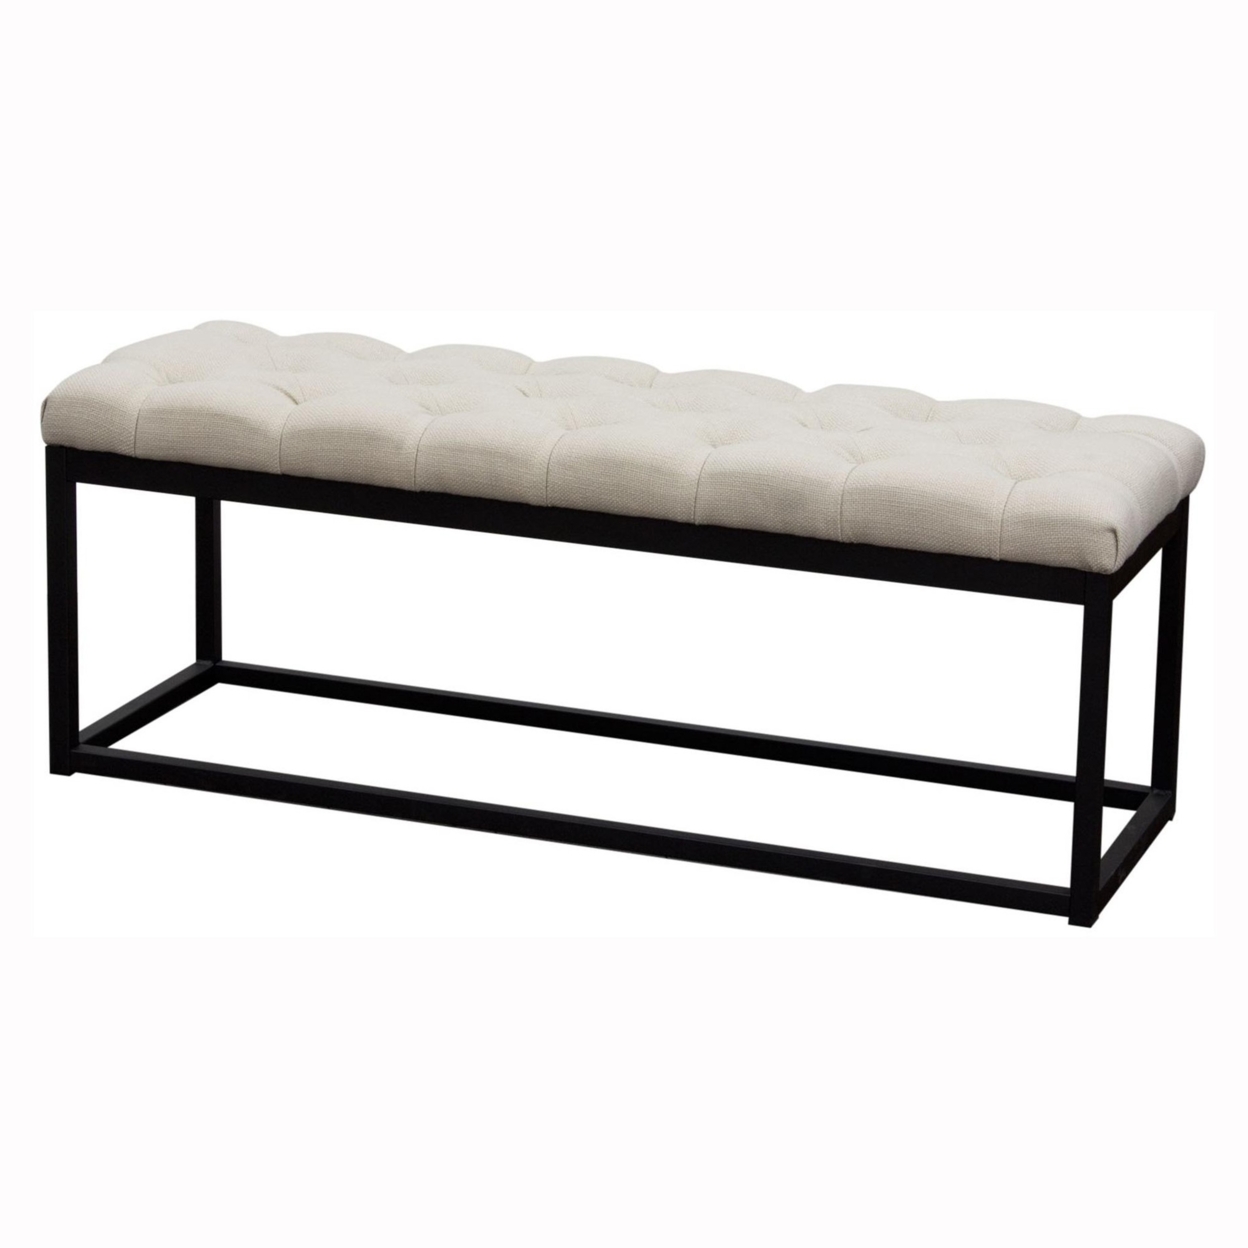 Linen Upholstered Metal Contemporary Bench With Diamond Tuft Details, Beige And Black- Saltoro Sherpi